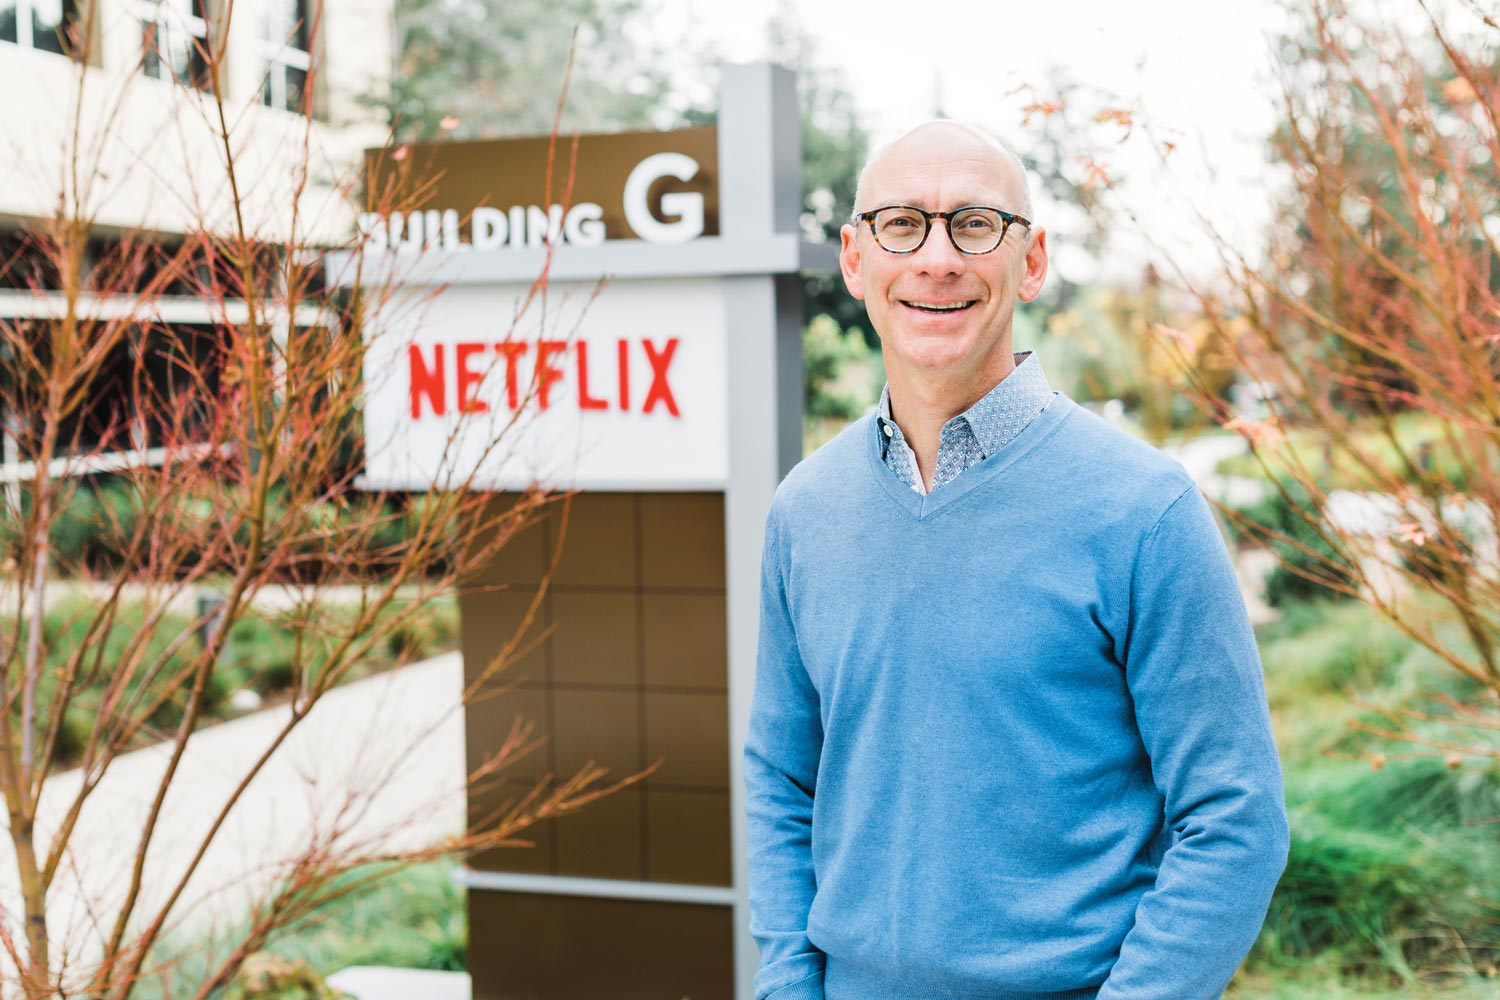 David Hyman stands in front of an outdoor Netflix sign